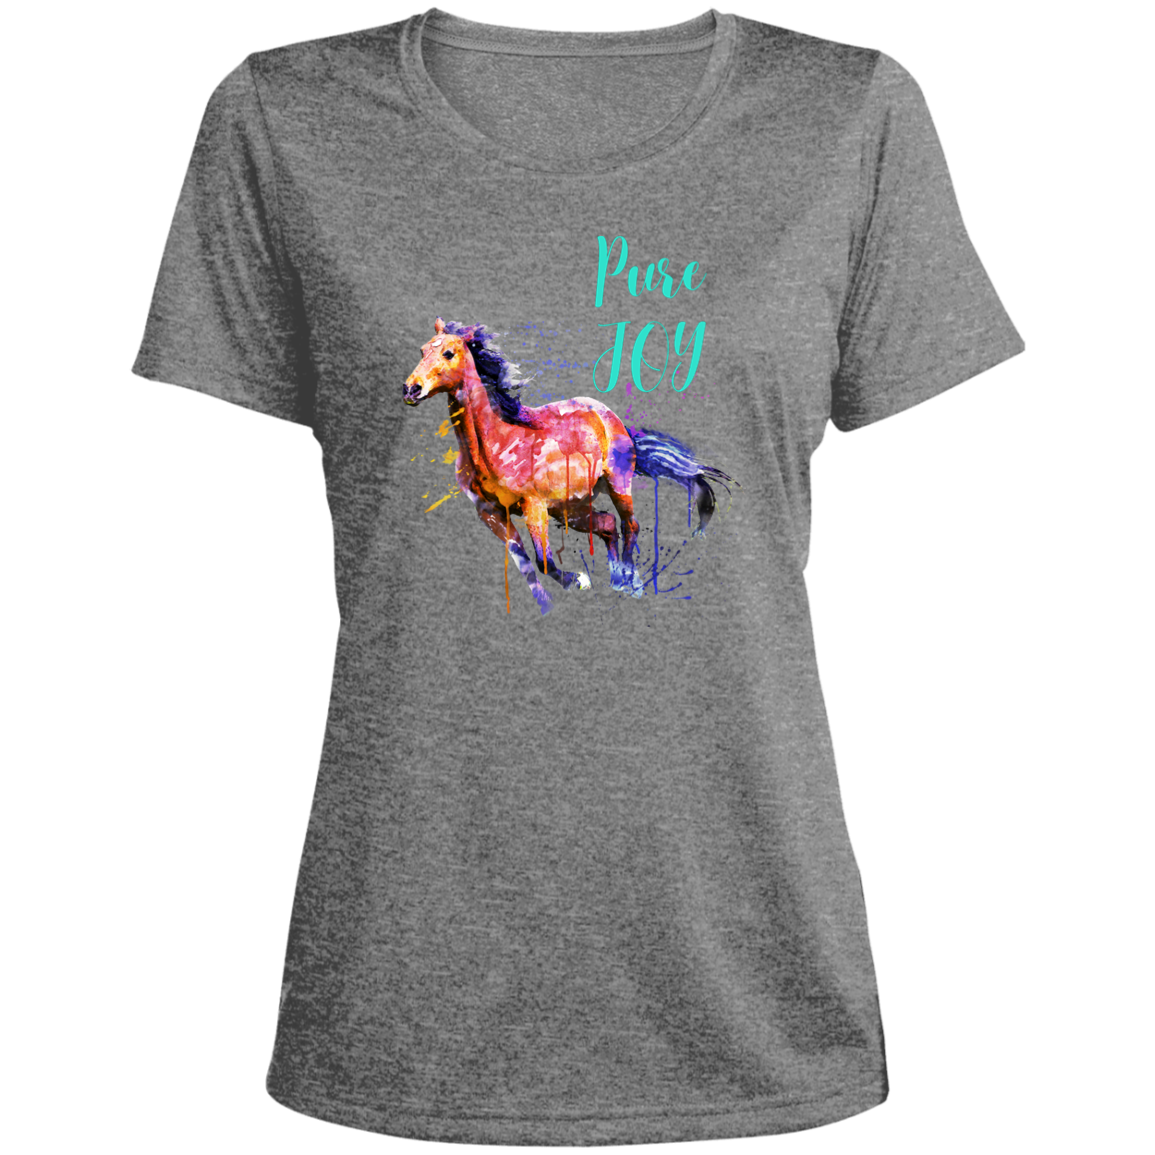 Pure Joy Scoop Neck T-Shirt Horse Lover Gift - MyAllOutHorses